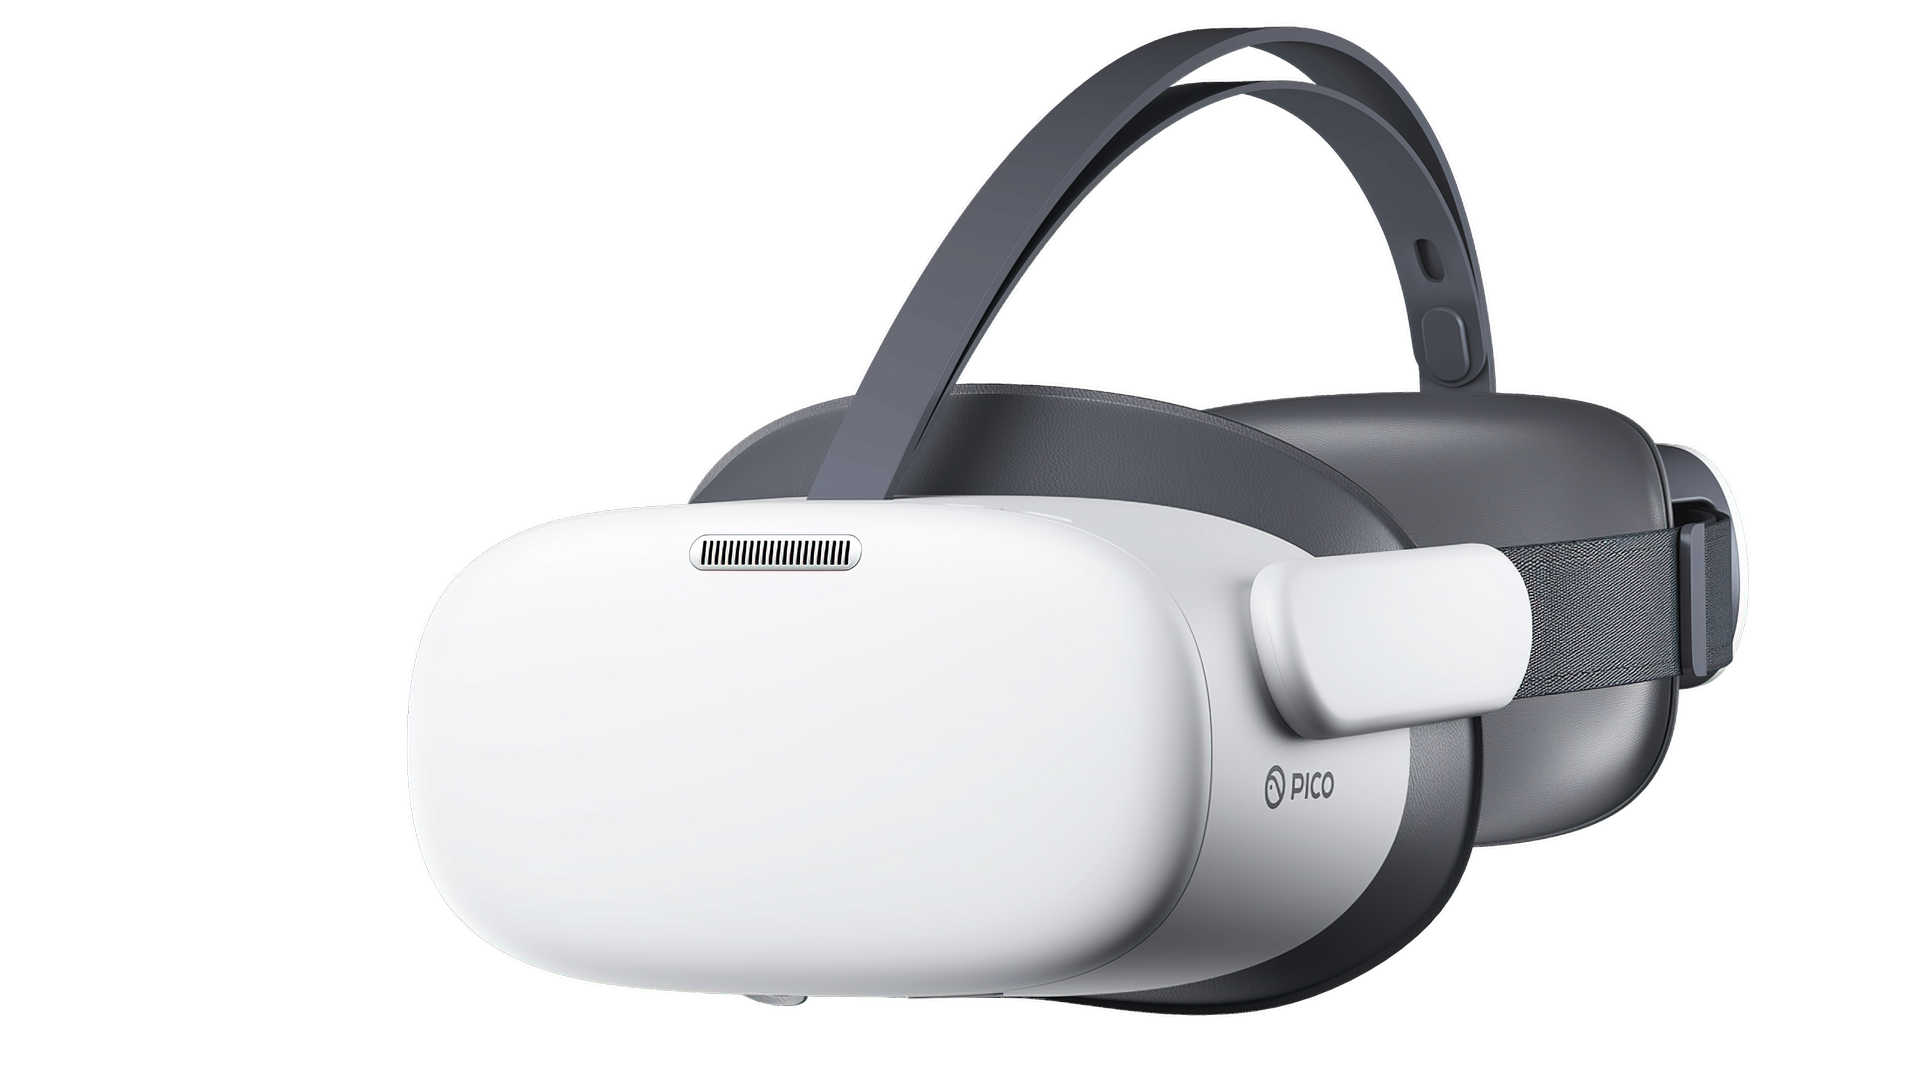 Pico G3 VR headset unveiled